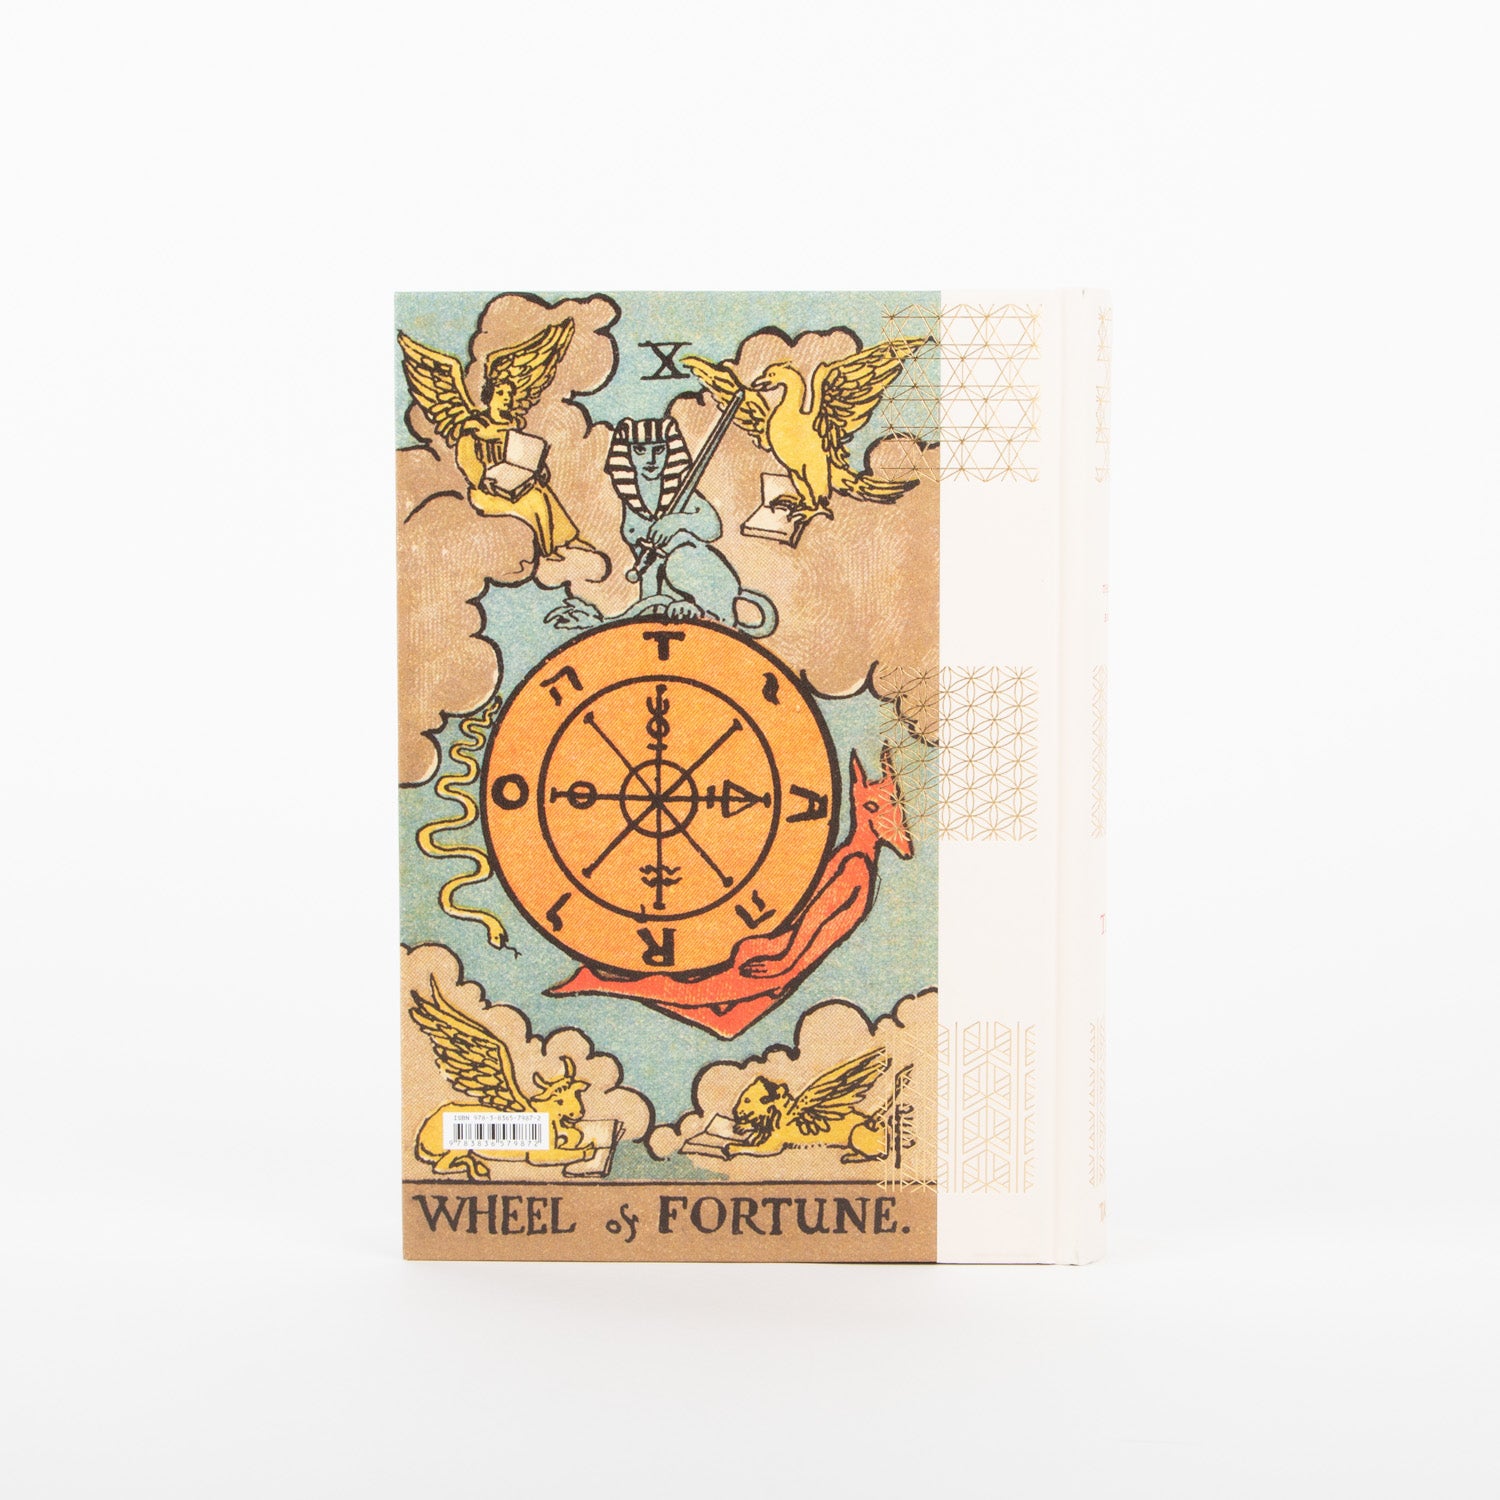 tarot the library of esoterica hardcover